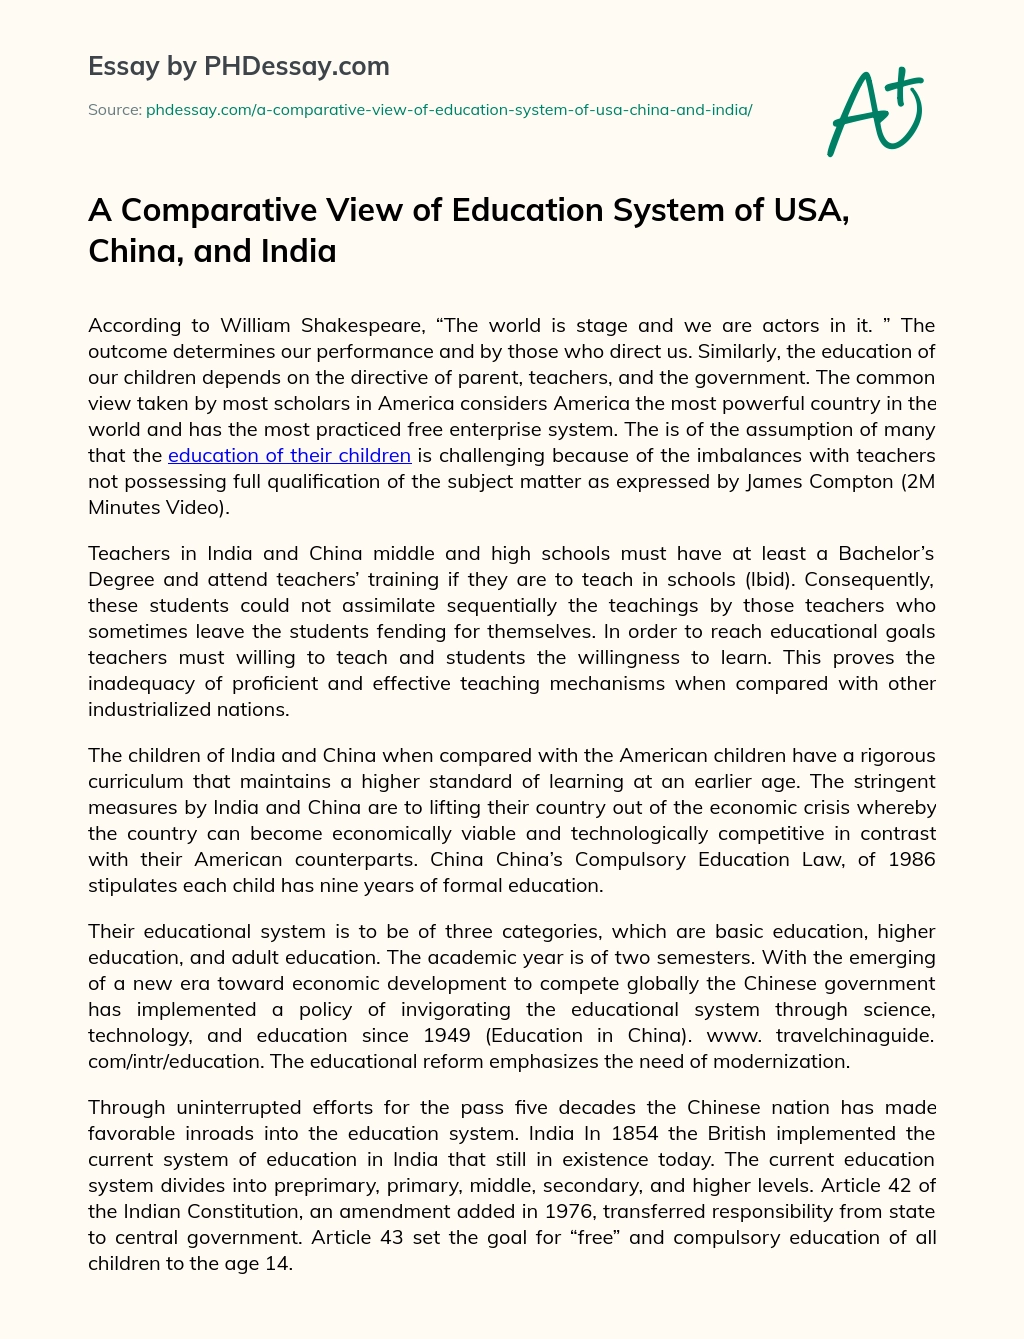 A Comparative View of Education System of USA, China, and India essay